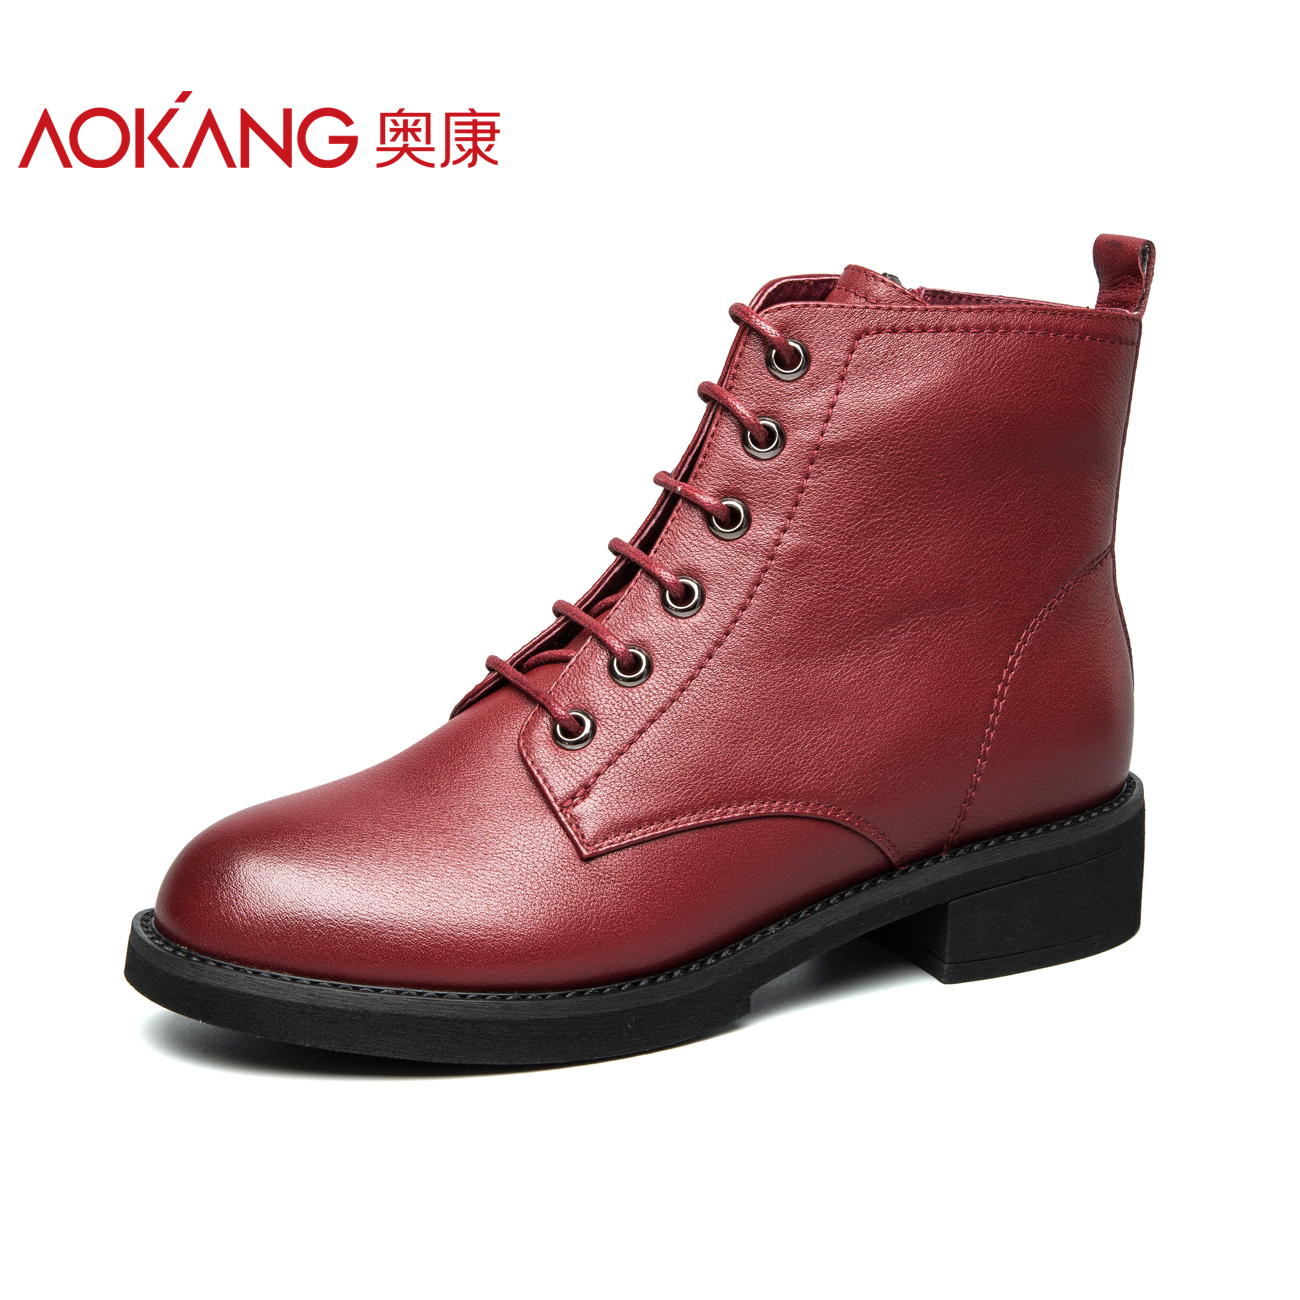 Autumn and Winter Okang Women's Shoes New Fashion Boots with Thick-heeled Cowskin Side Zipper and Suede Short Martin Boots